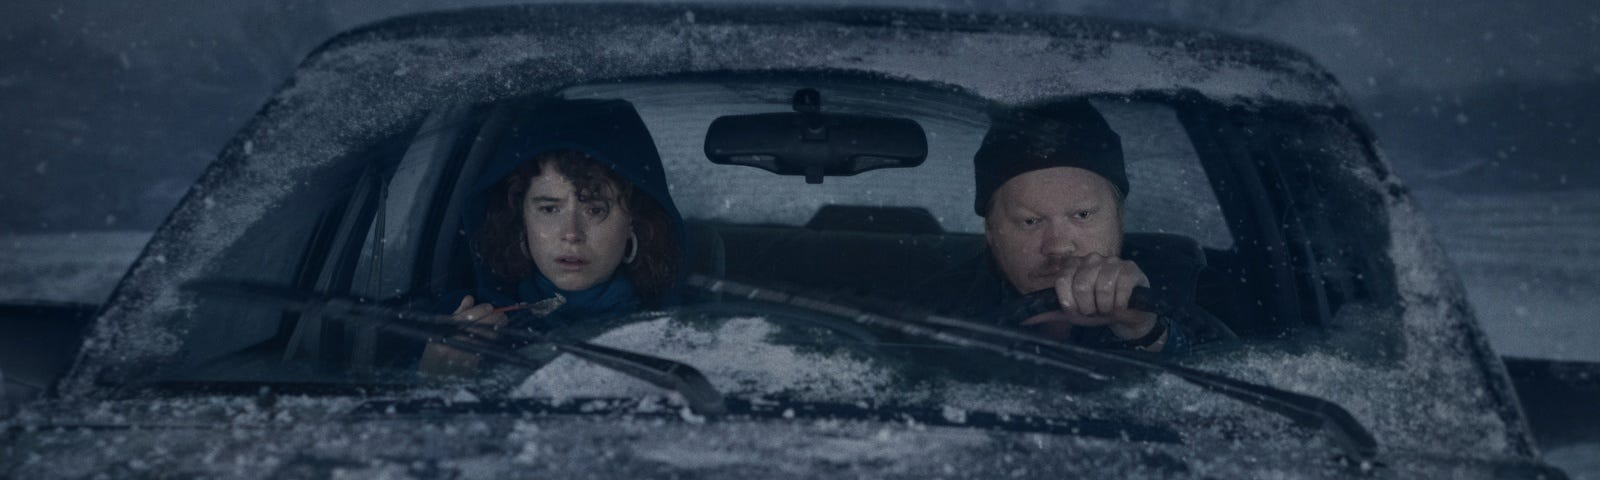 Jessie Buckley and Jesse Plemons in the car during a snowy drive in I’m Thinking of Ending Things.